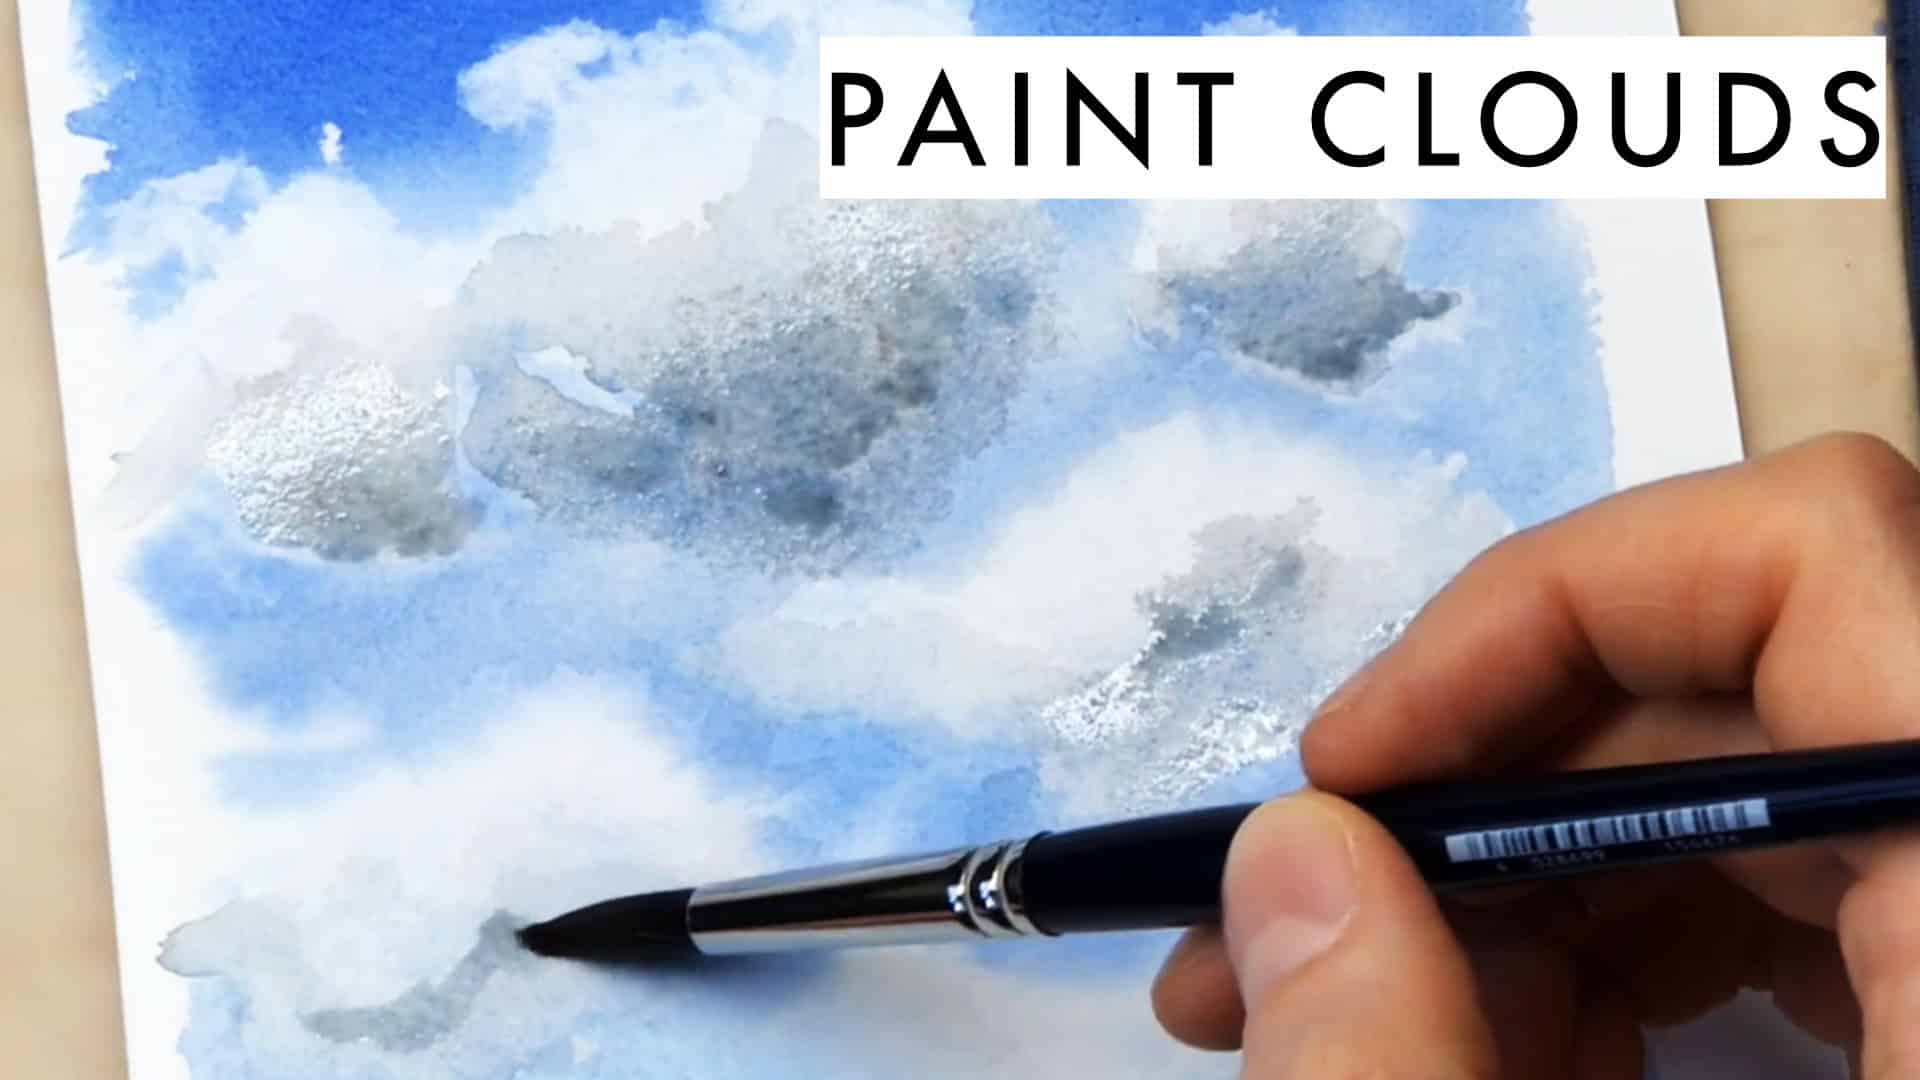 How to blend colors with Posca pens the easy way! In this drawing tuto